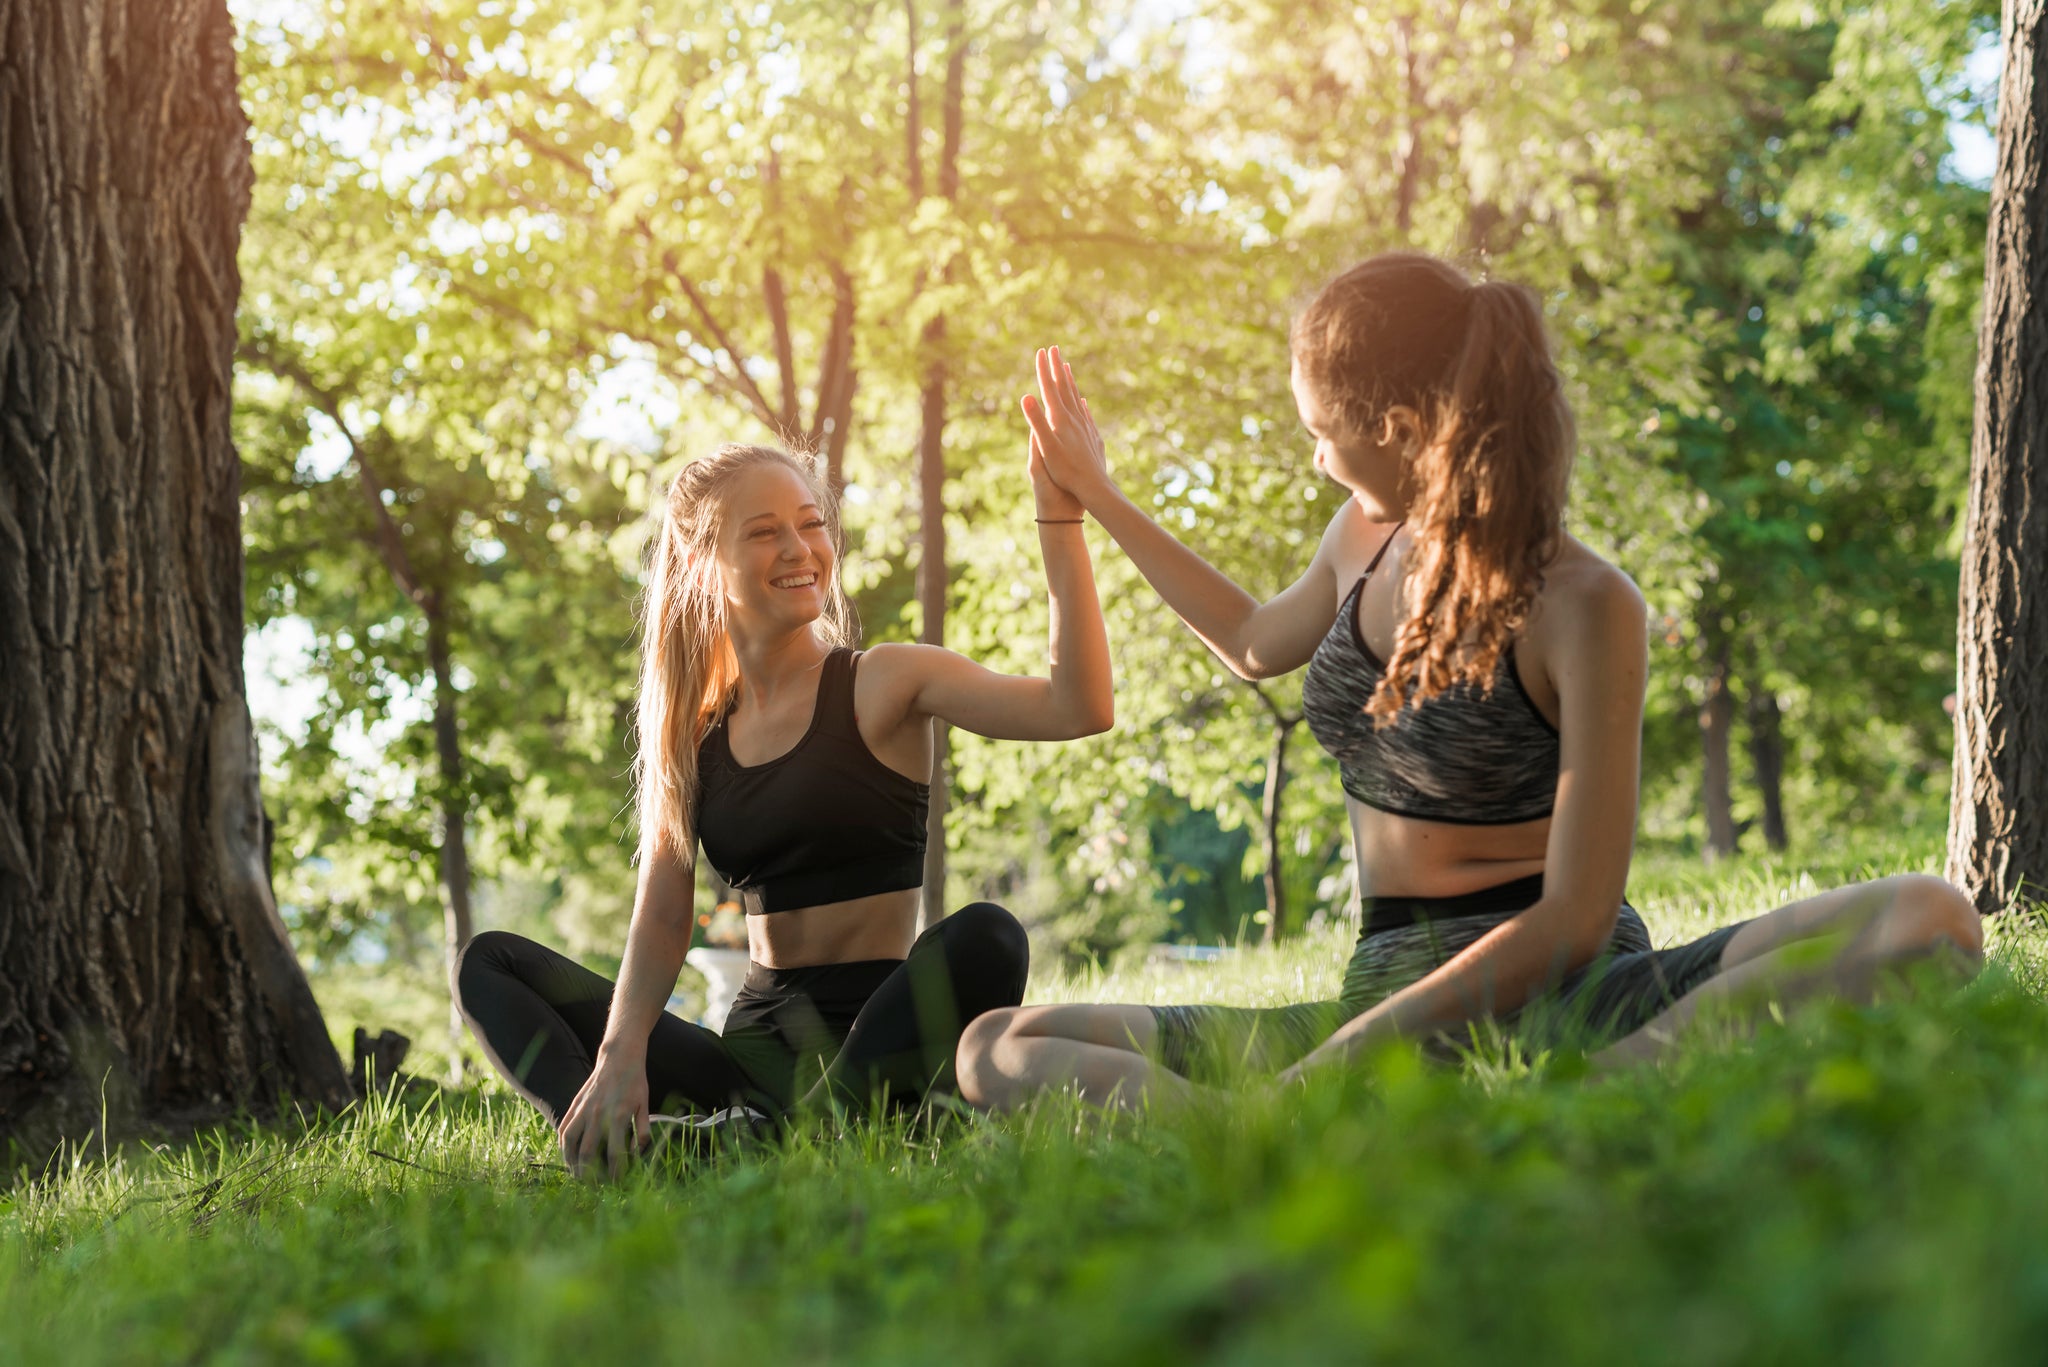 6 Tips to Feel Safer When Exercising Outdoors